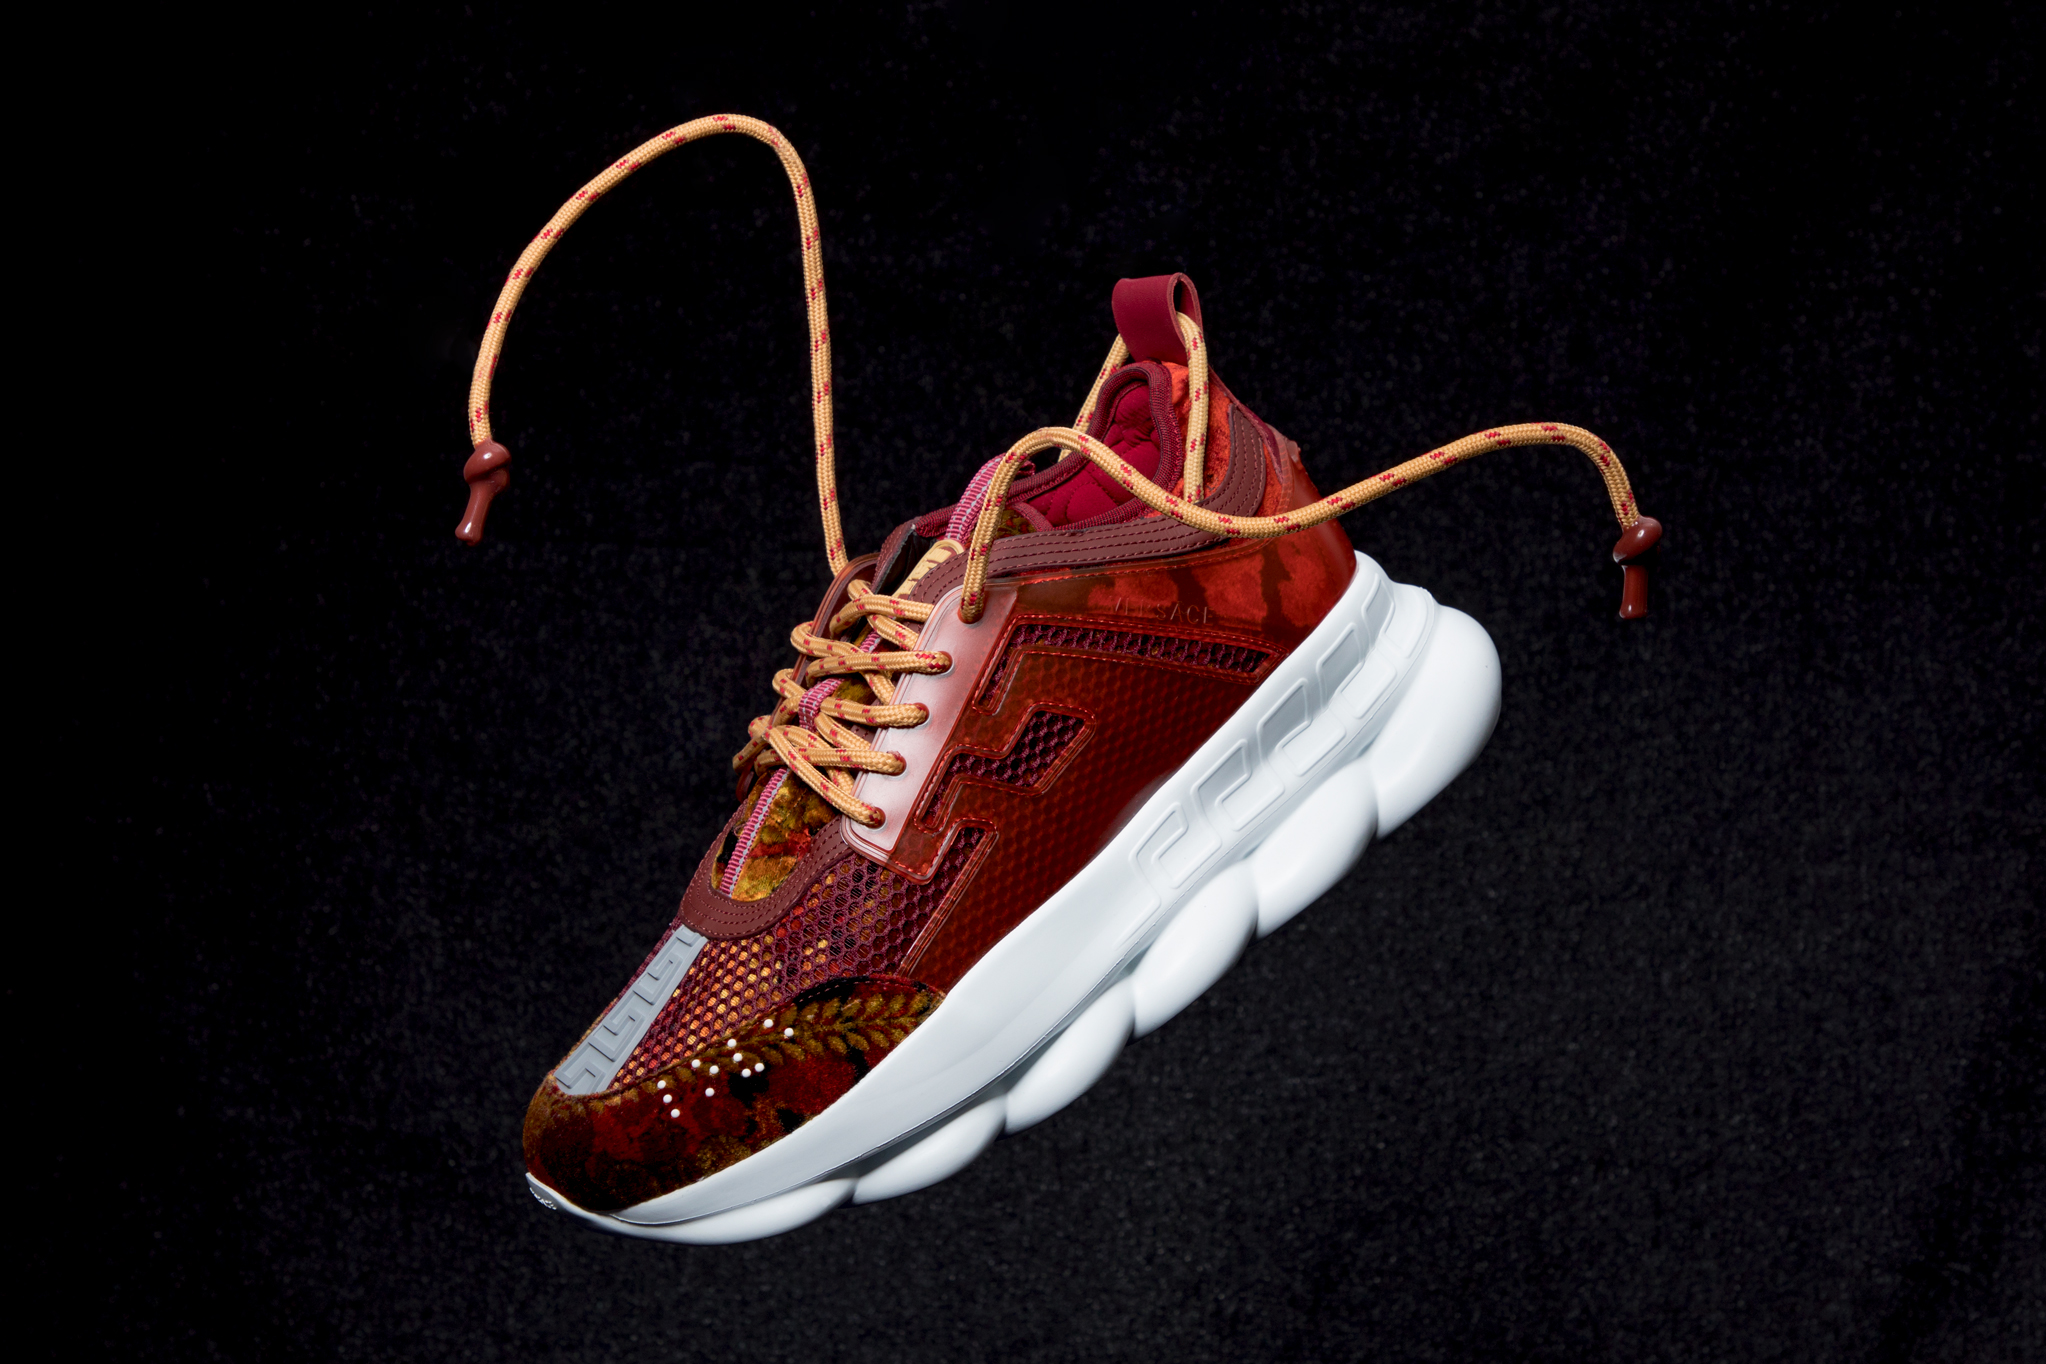 Versace Chain Reaction 2 Chainz Red - Red - Low-top Sneakers